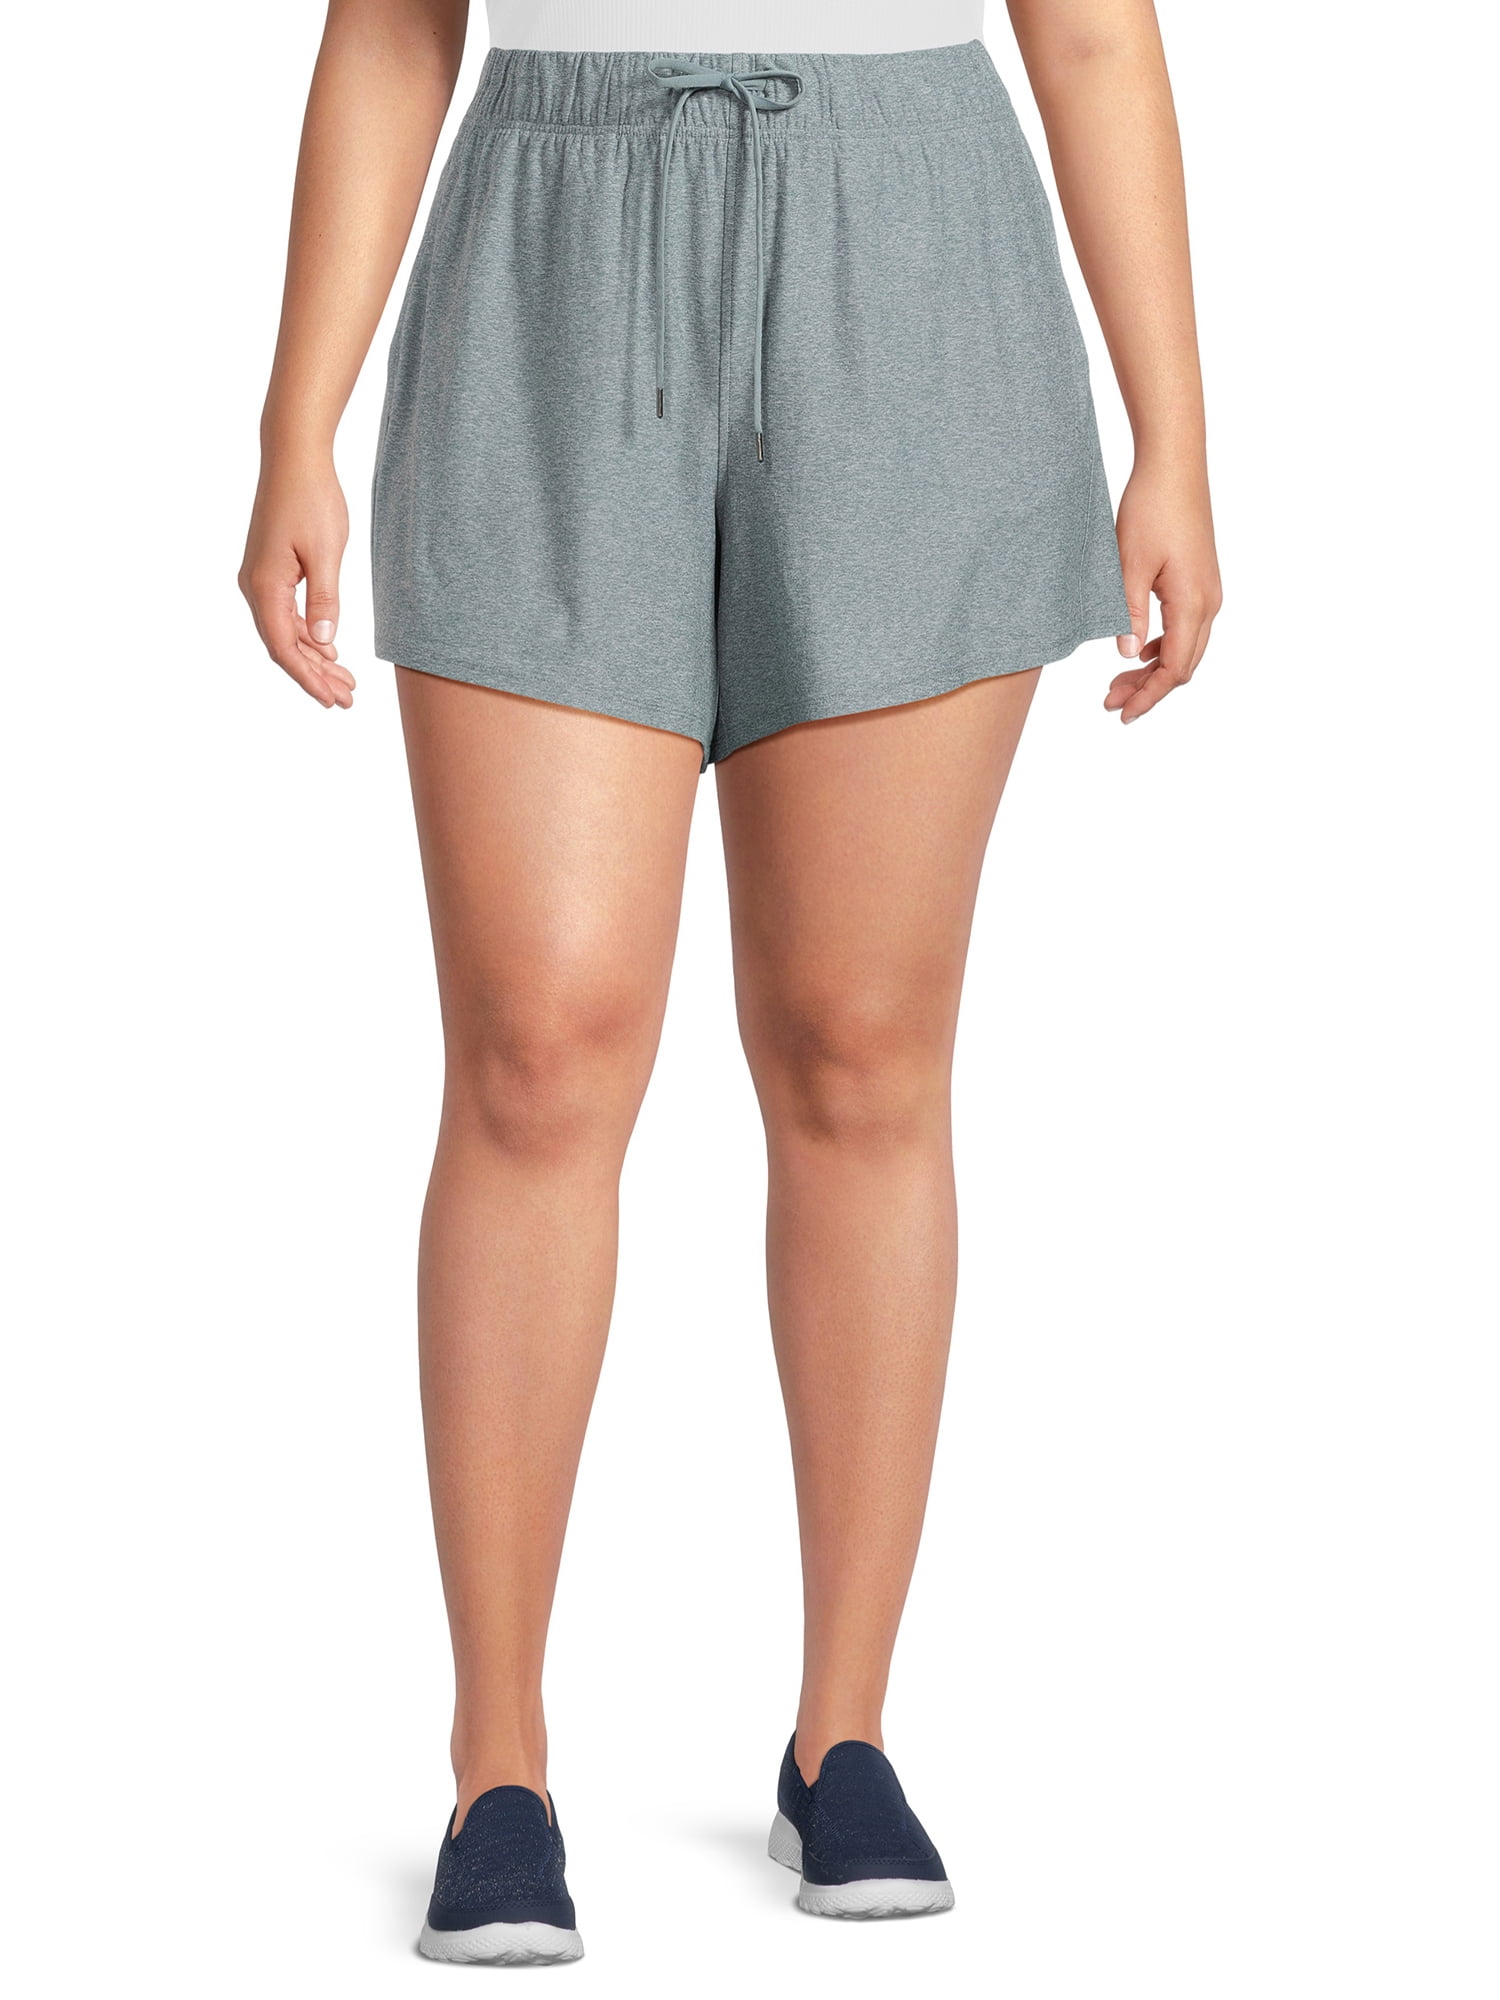 Athletic Works Women's Plus Size Buttery Soft Performance Gym Shorts, 5.5”  Inseam, Sizes 1X-4X, Available in 1-Pack, 2-Pack 